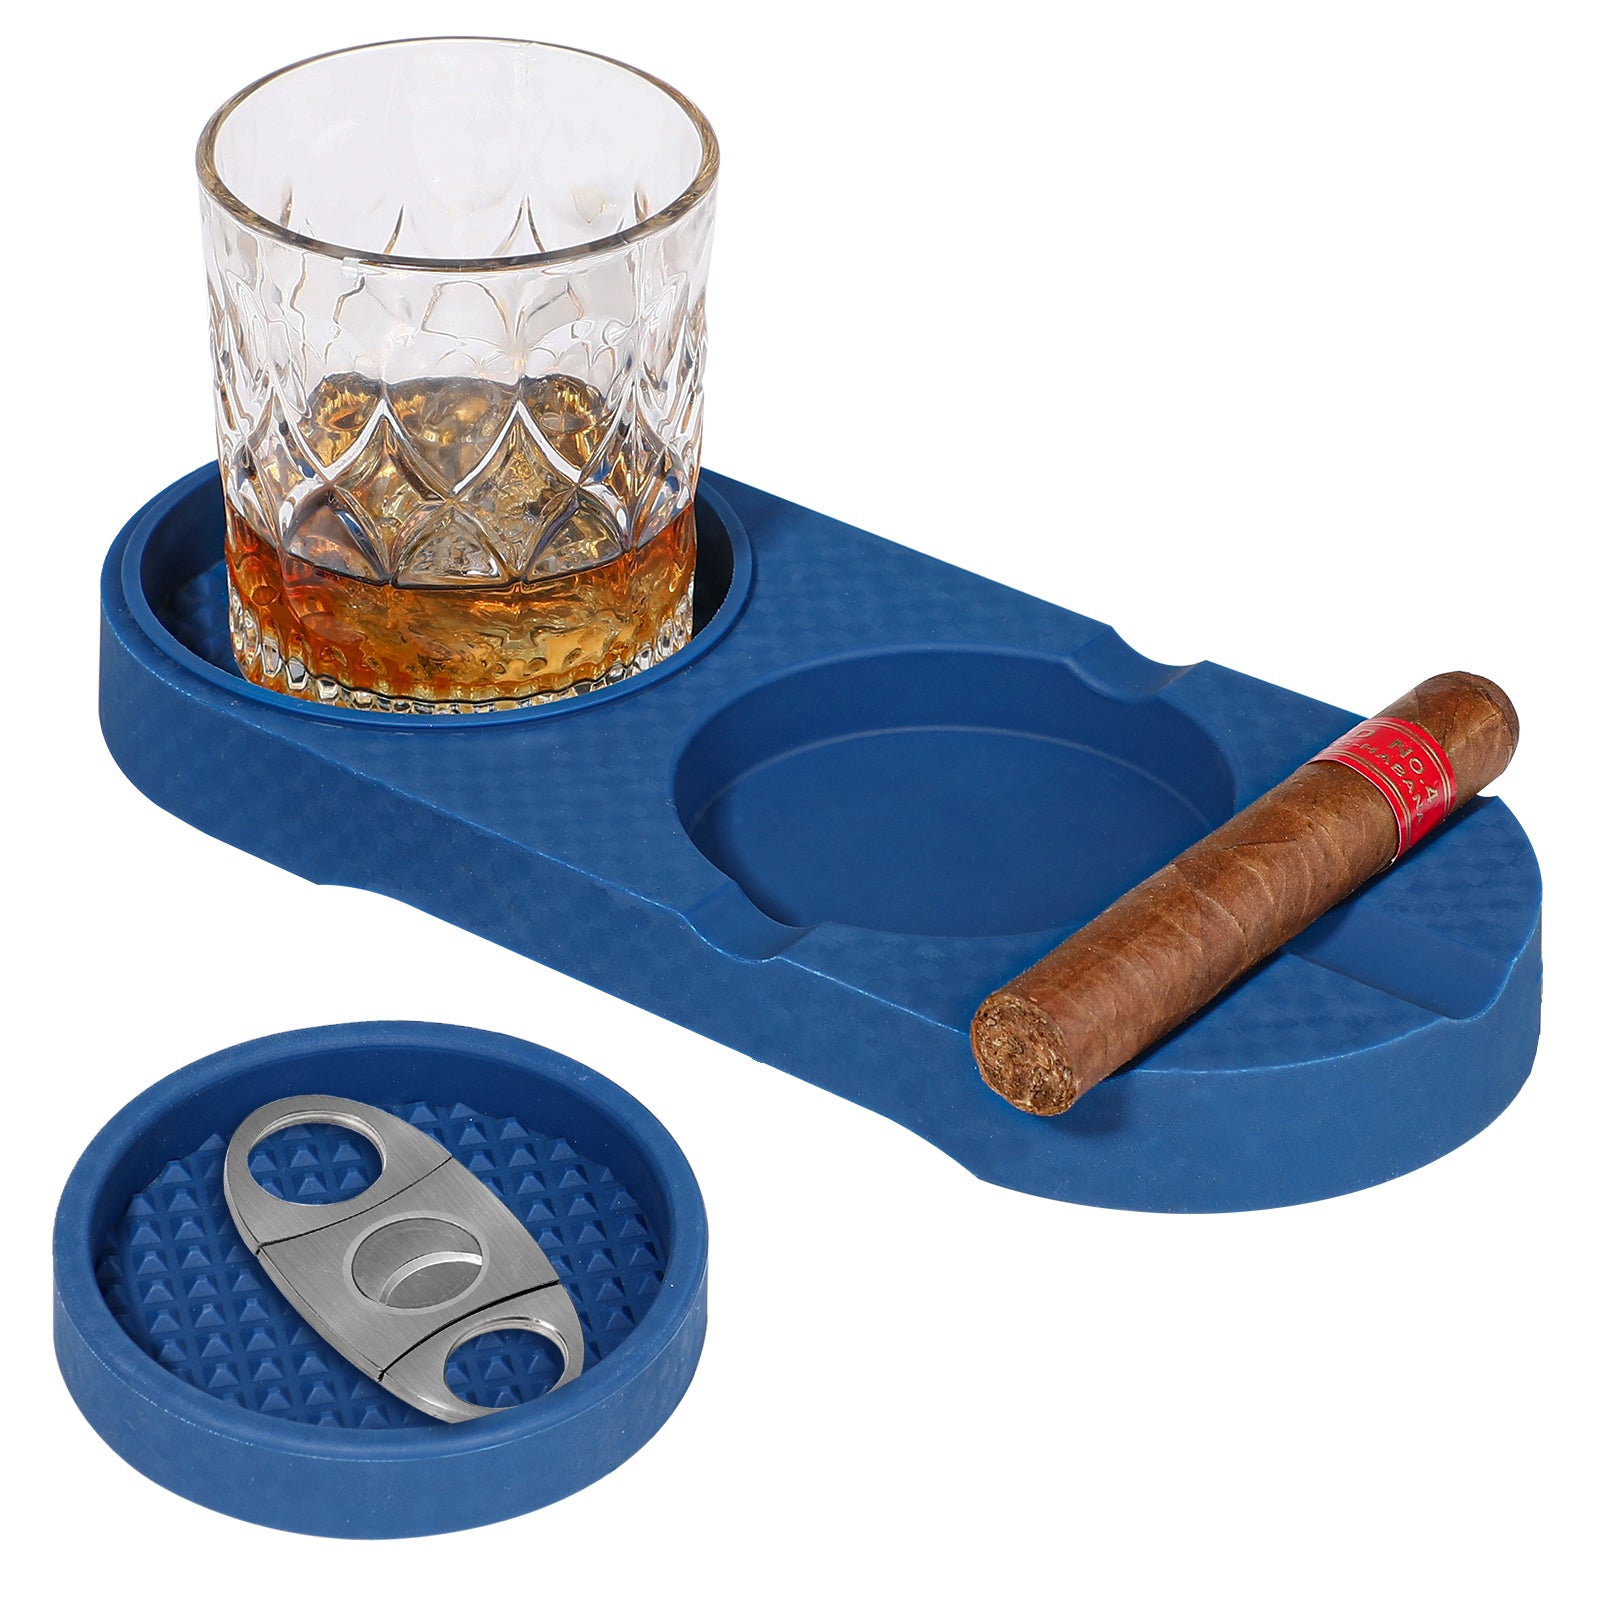 Koluti 2-Layer Whiskey Glass Coaster and Cigar Ashtray with Cutter (Gray)